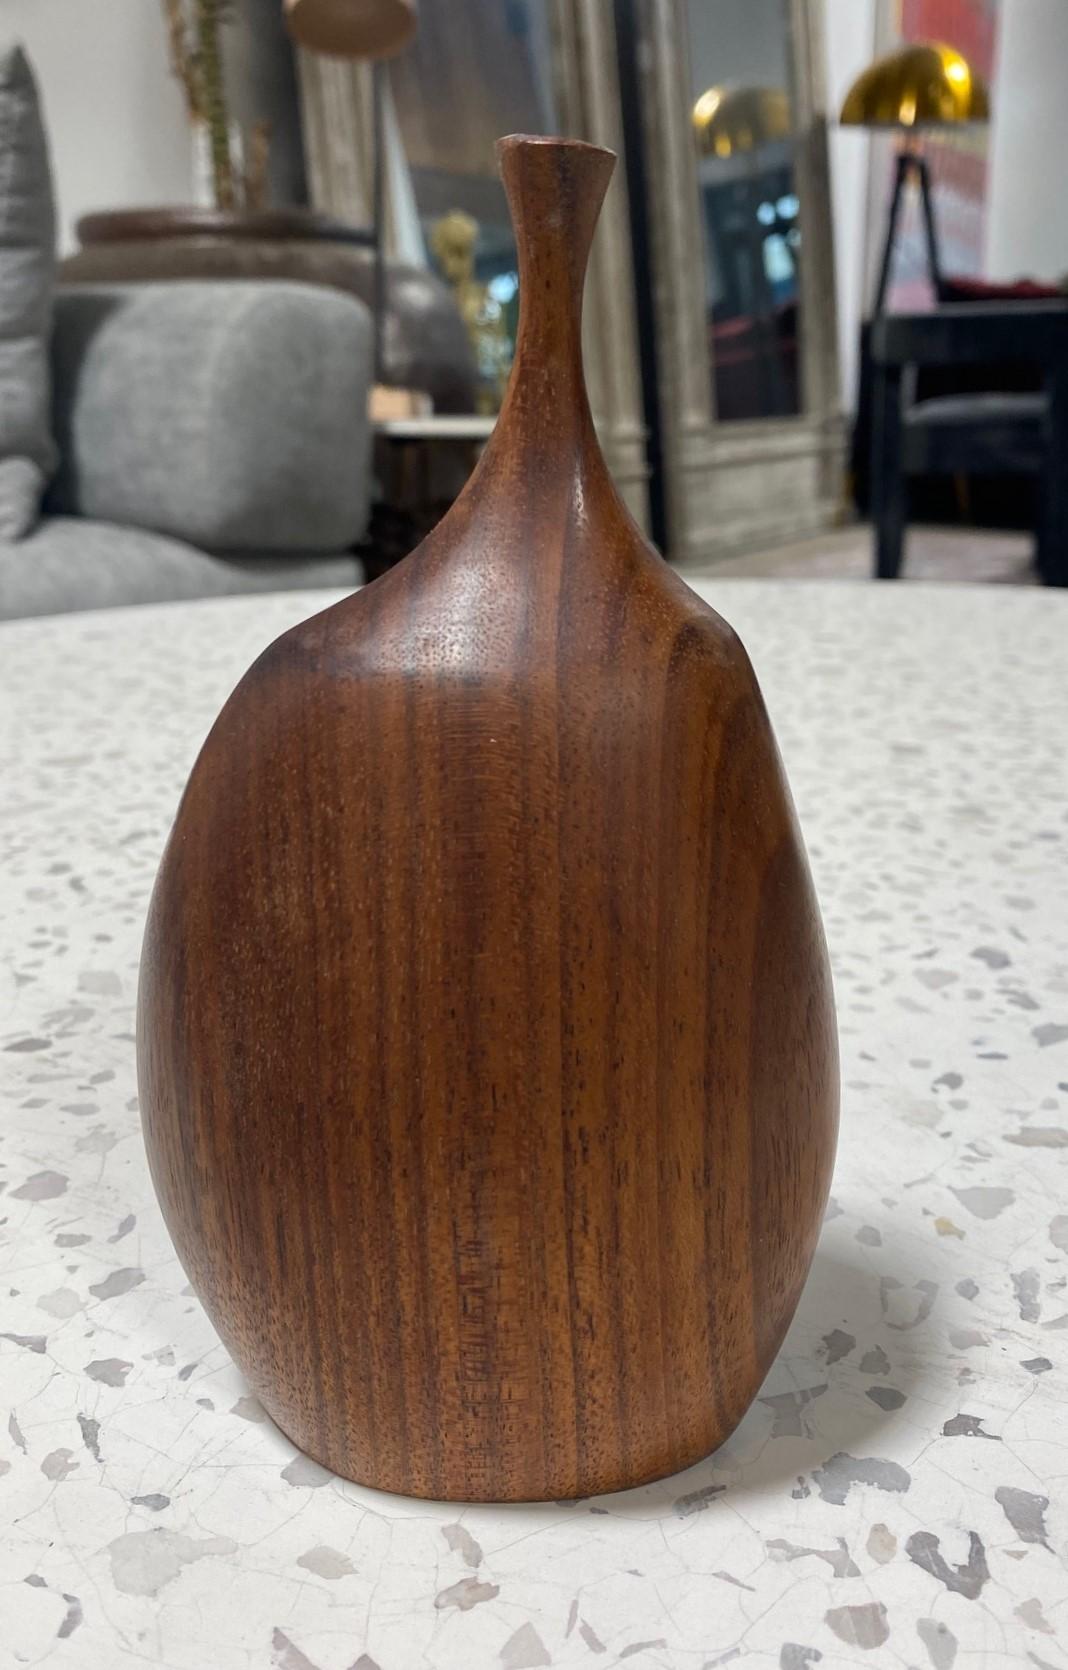 A very beautifully made and sculpted wood-turned weed vase by famed American (Mendocino, CA) artist/ sculptor Doug Ayers. The natural. organic wood grain is quite spectacular in this piece. 

Signed by Ayers on the base.

Ayers's work is becoming